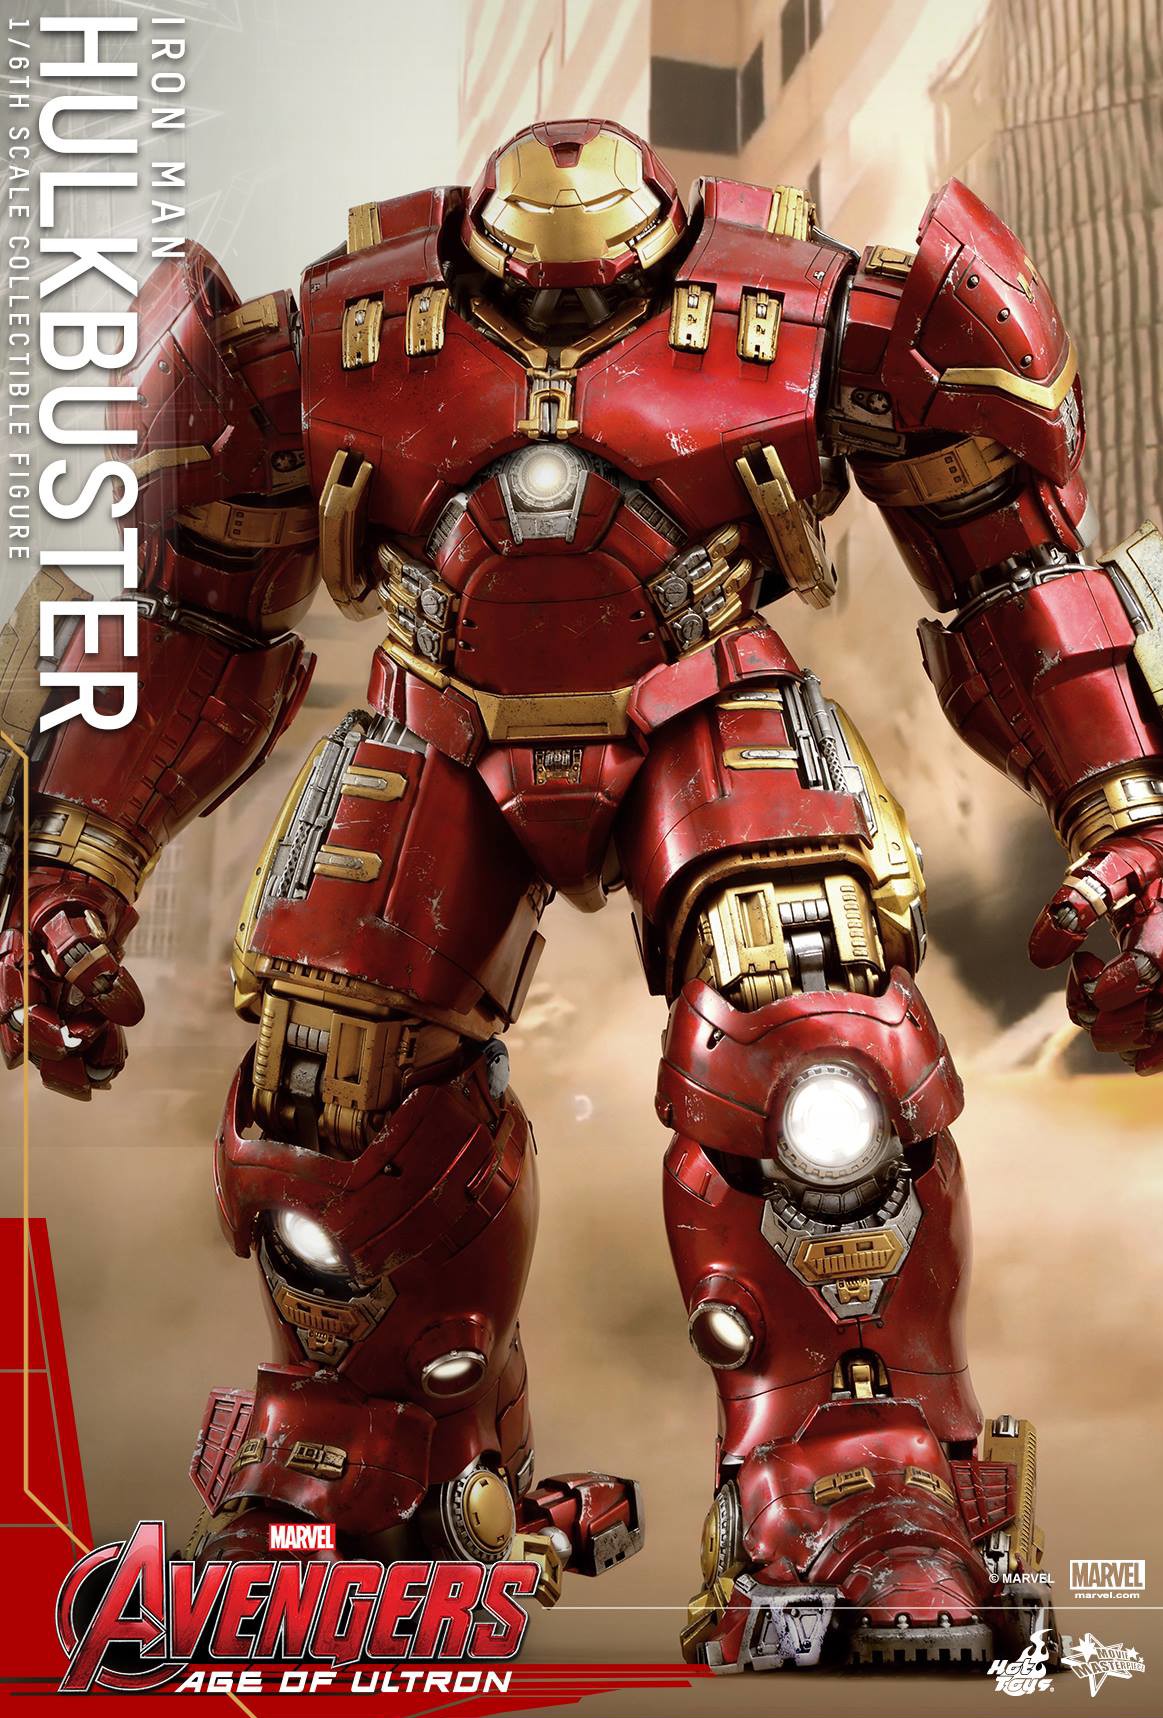 HOT Marvel Avengers Ultron Iron Man Hulk Buster Collection Model Toys Figures 